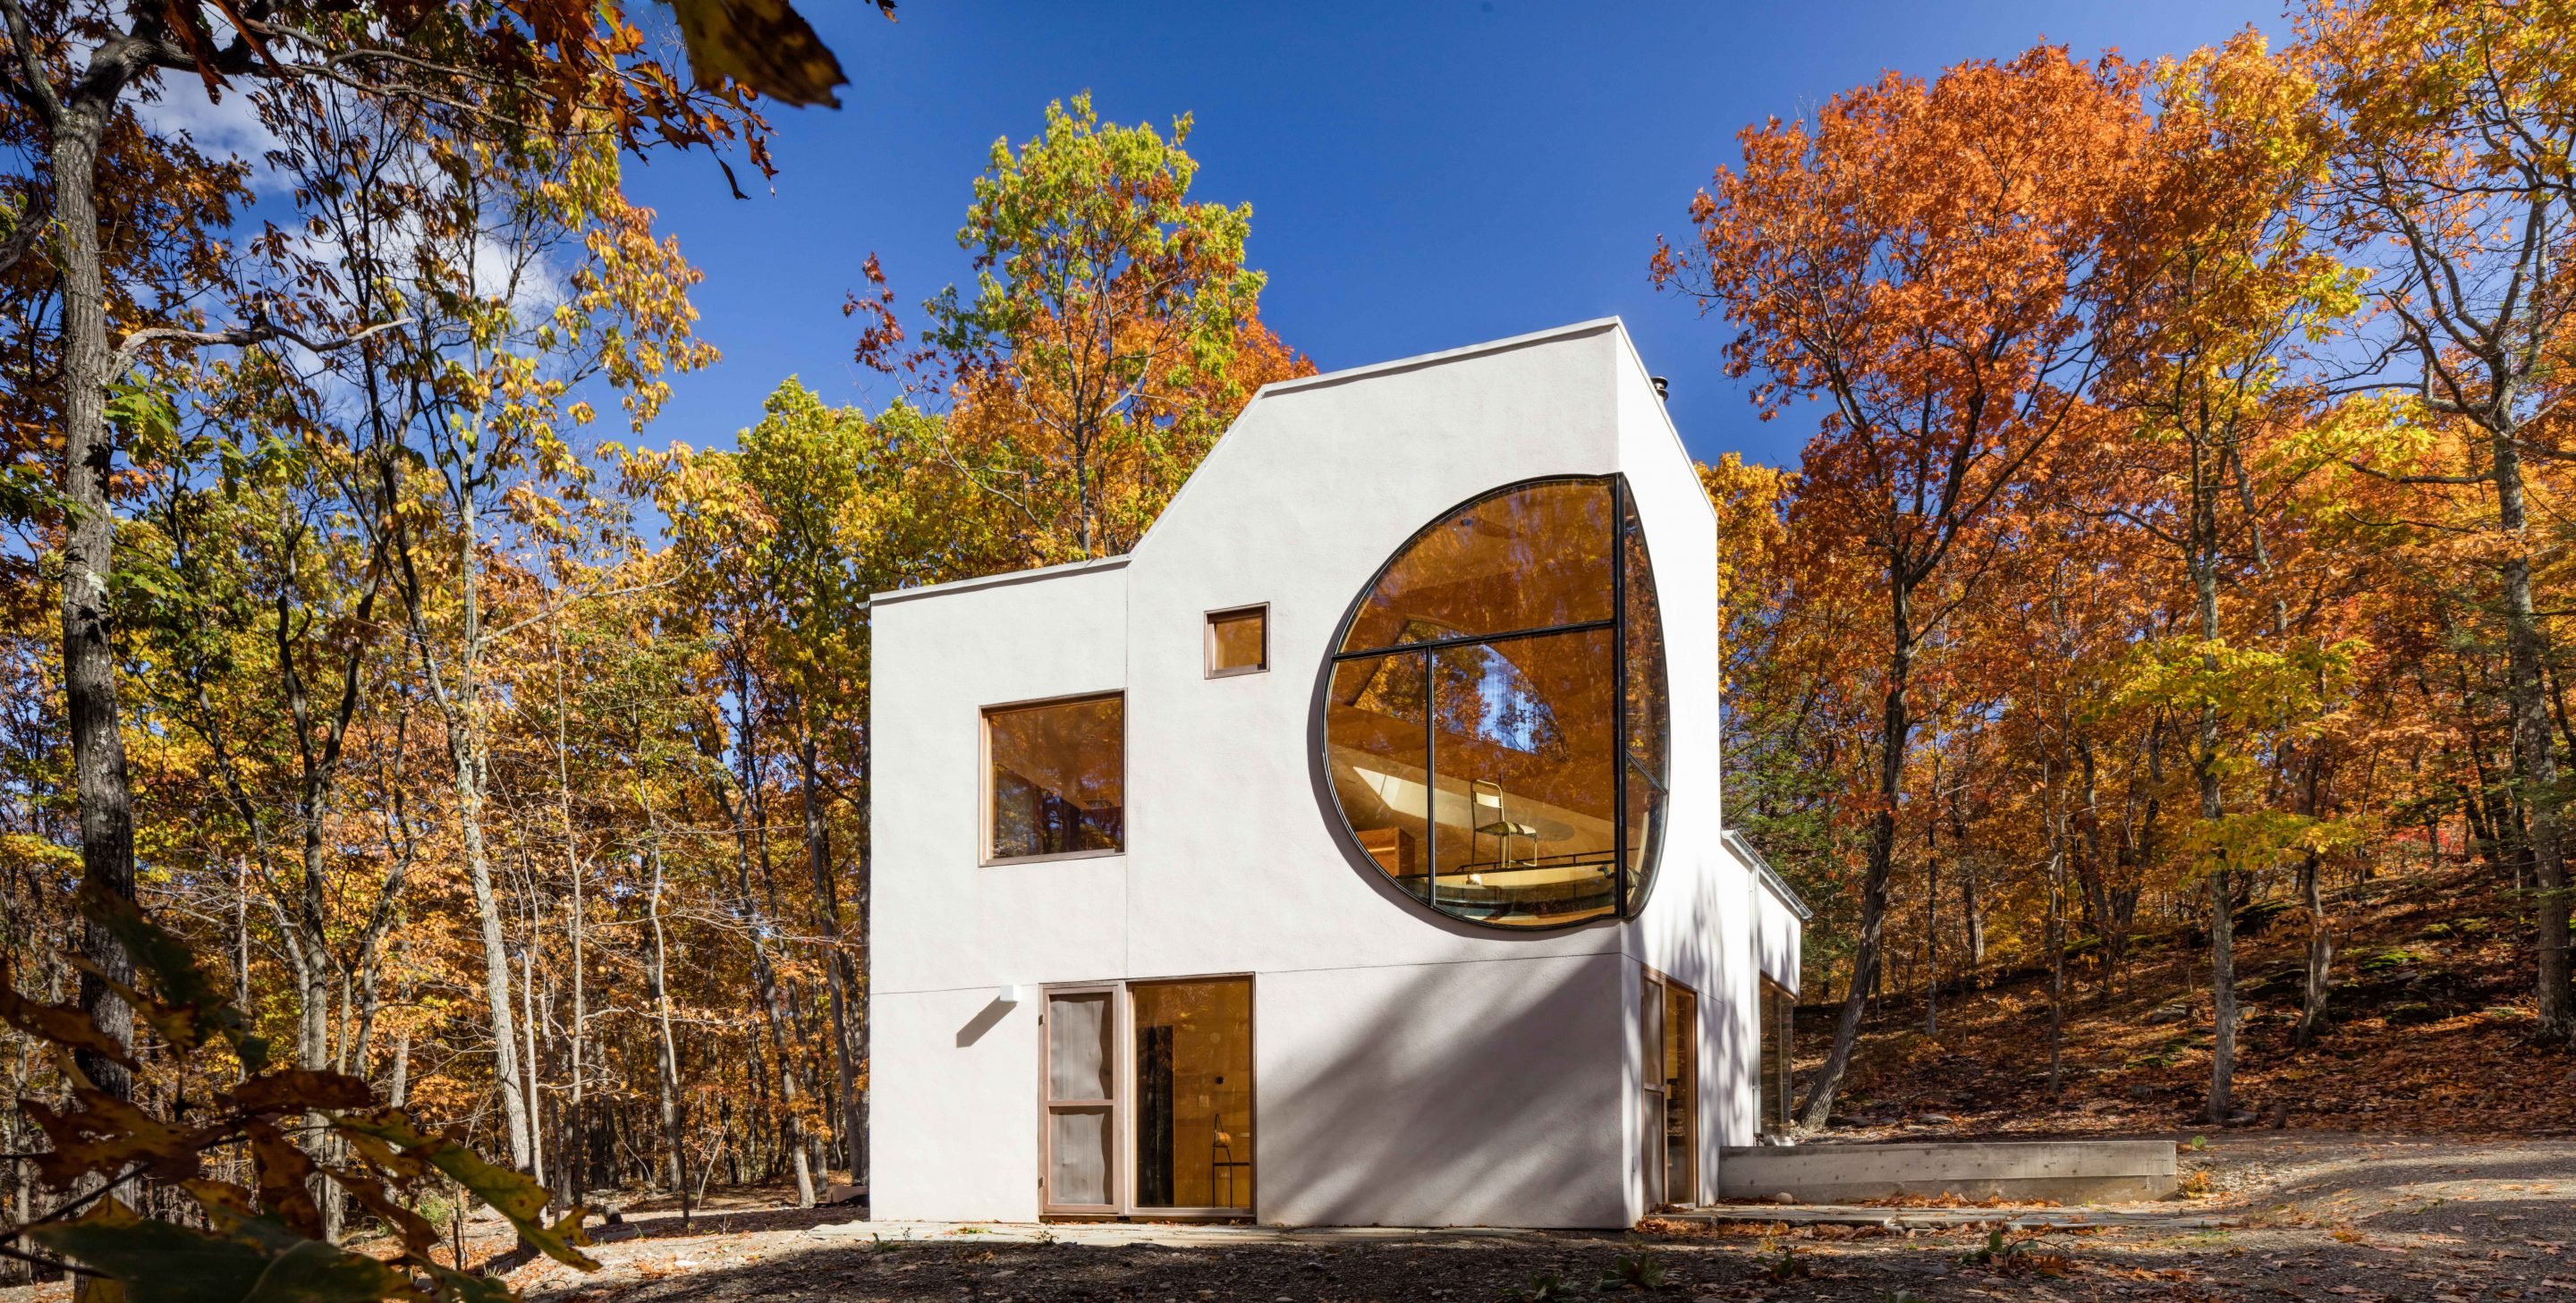 IGNANT-Architecture-Ex-of-In-House-Steven-Holl-Paul-Warchol-013